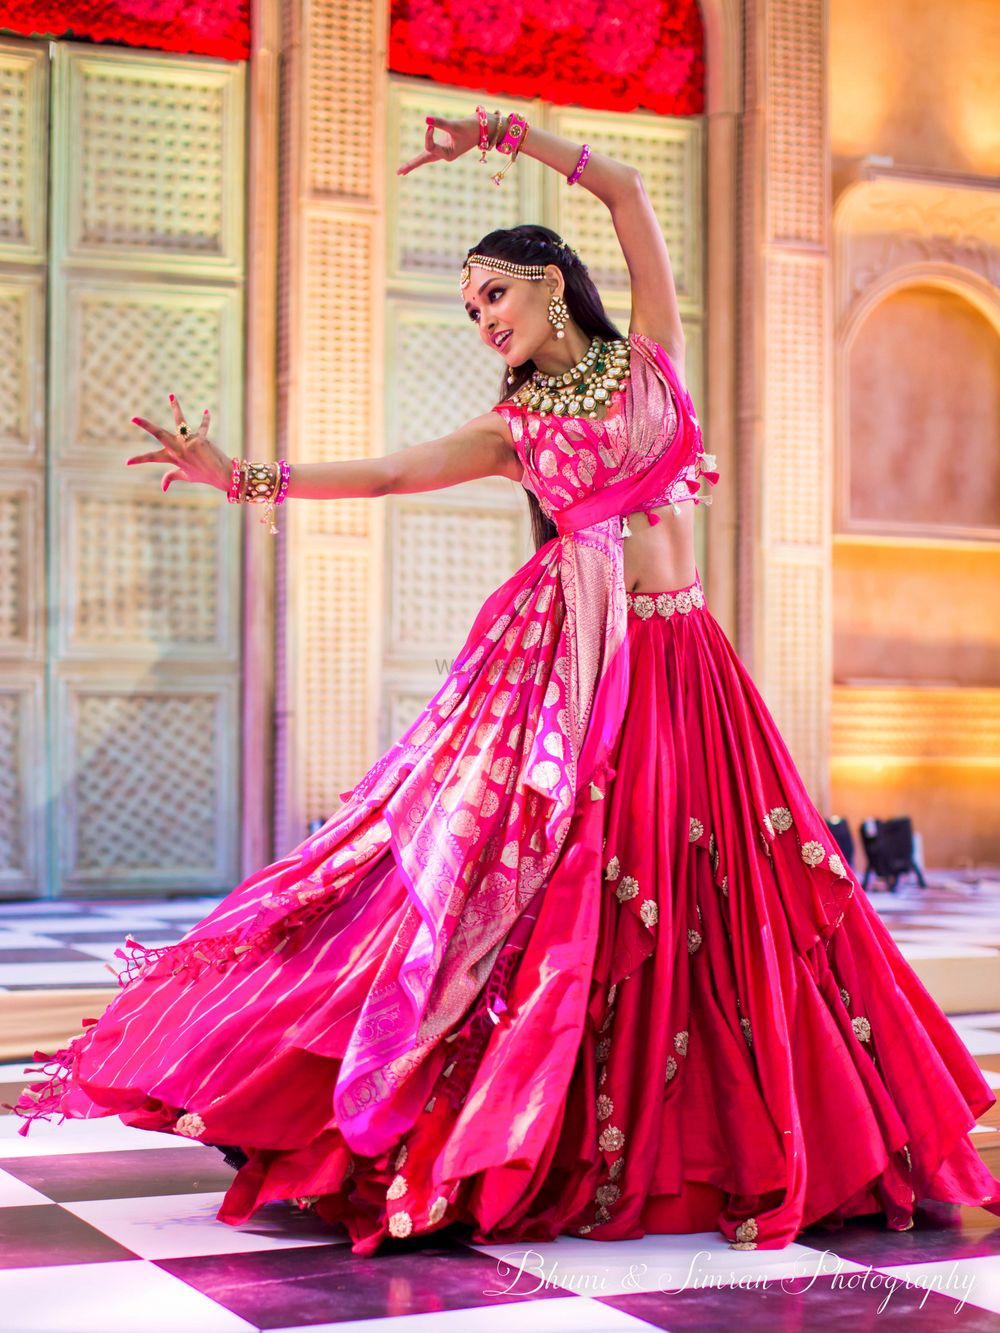 Photo of A bride in a unique mehndi outfit dancing on the stage